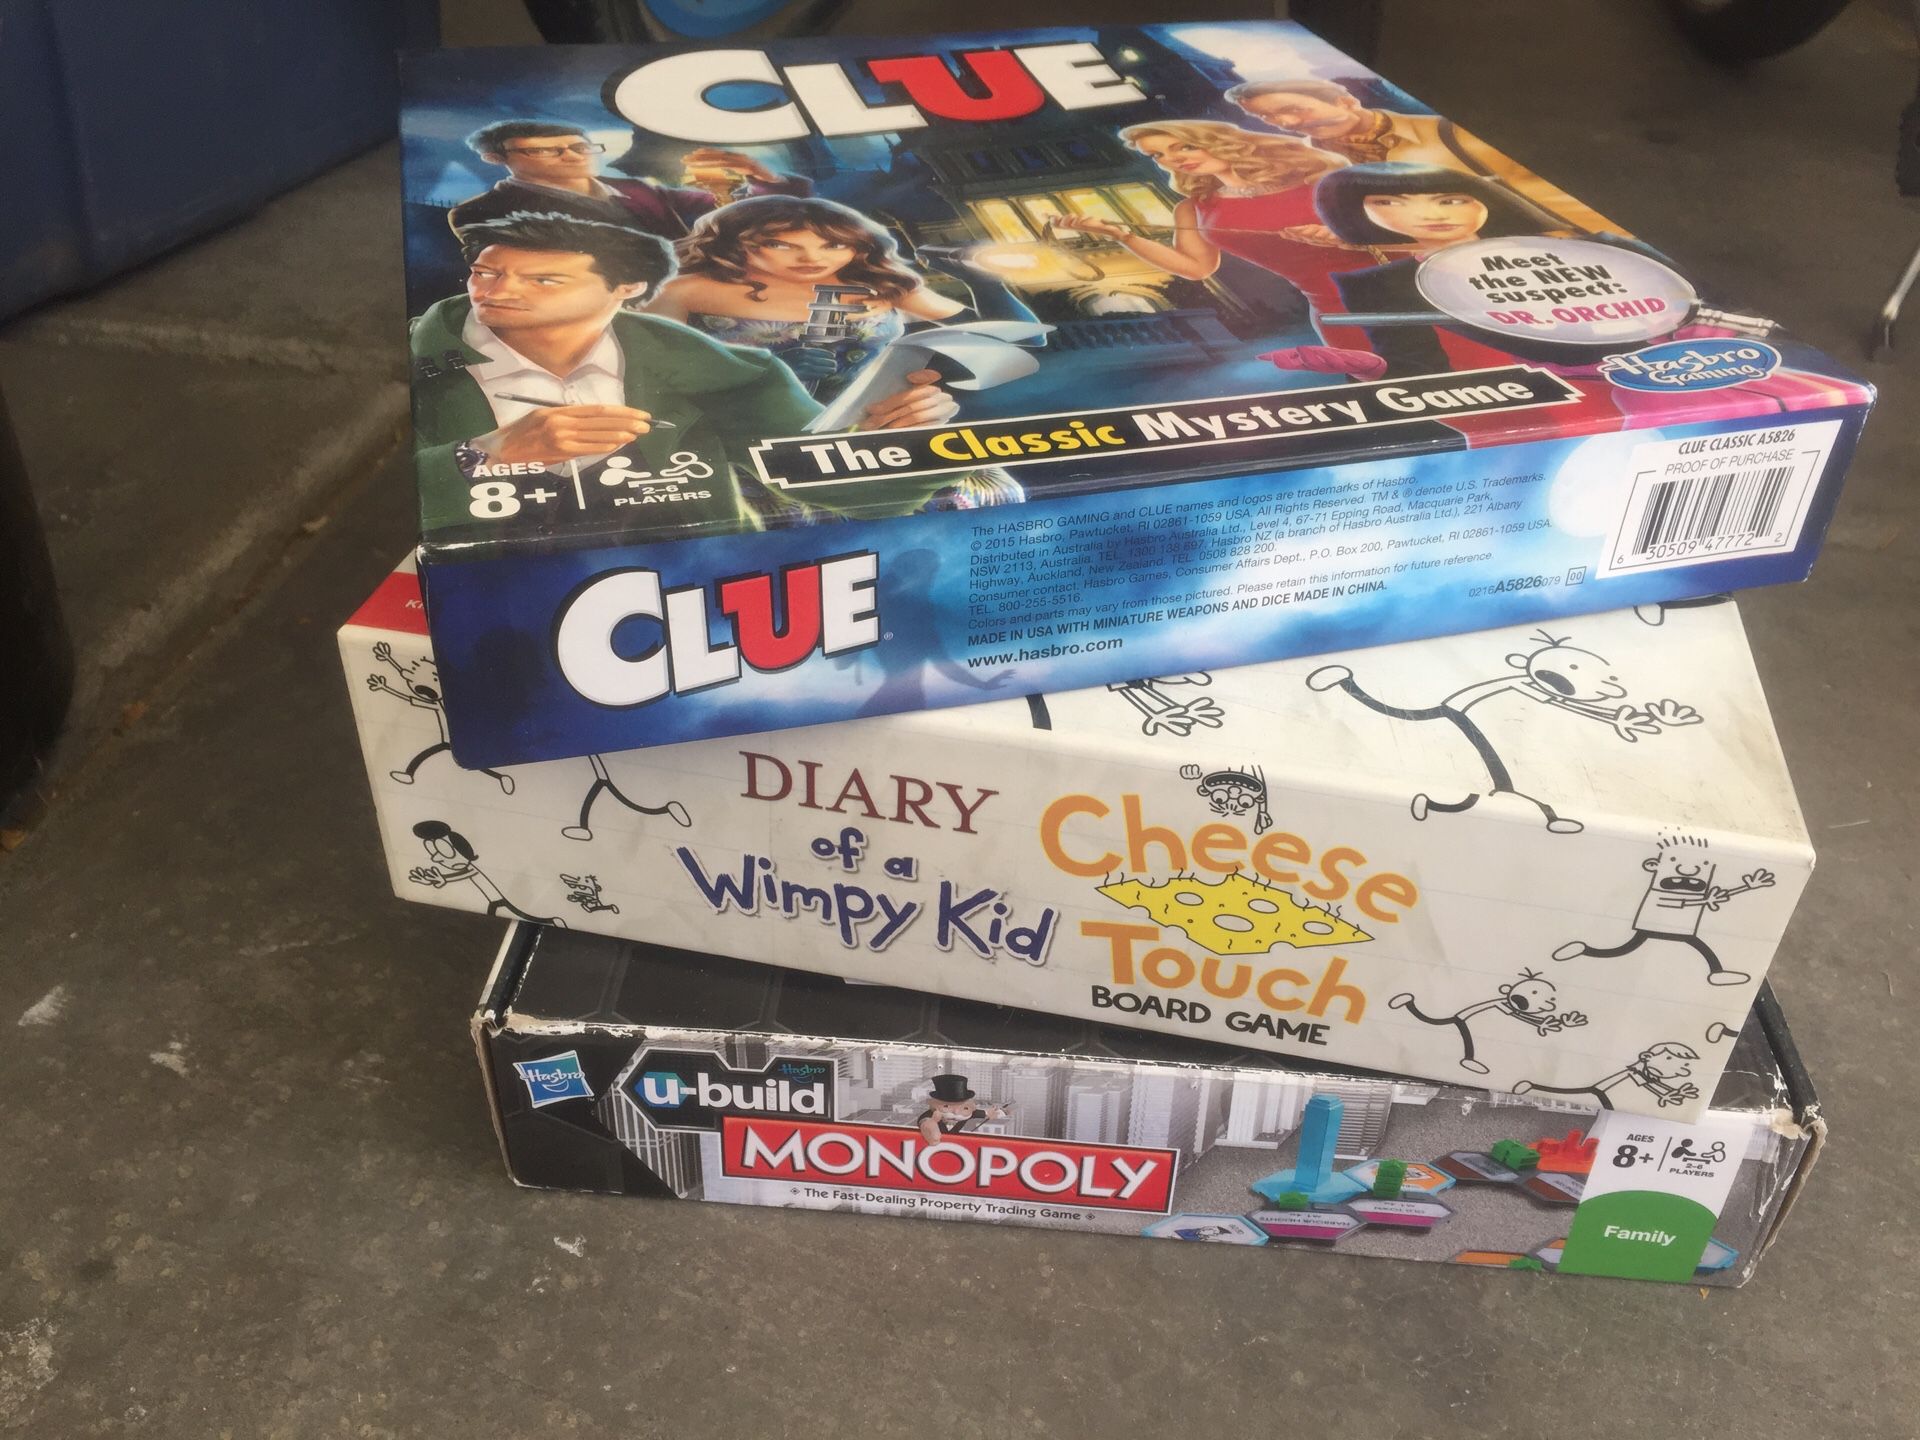 Monopoly, Diary of a wimpy kid, Clue Board games